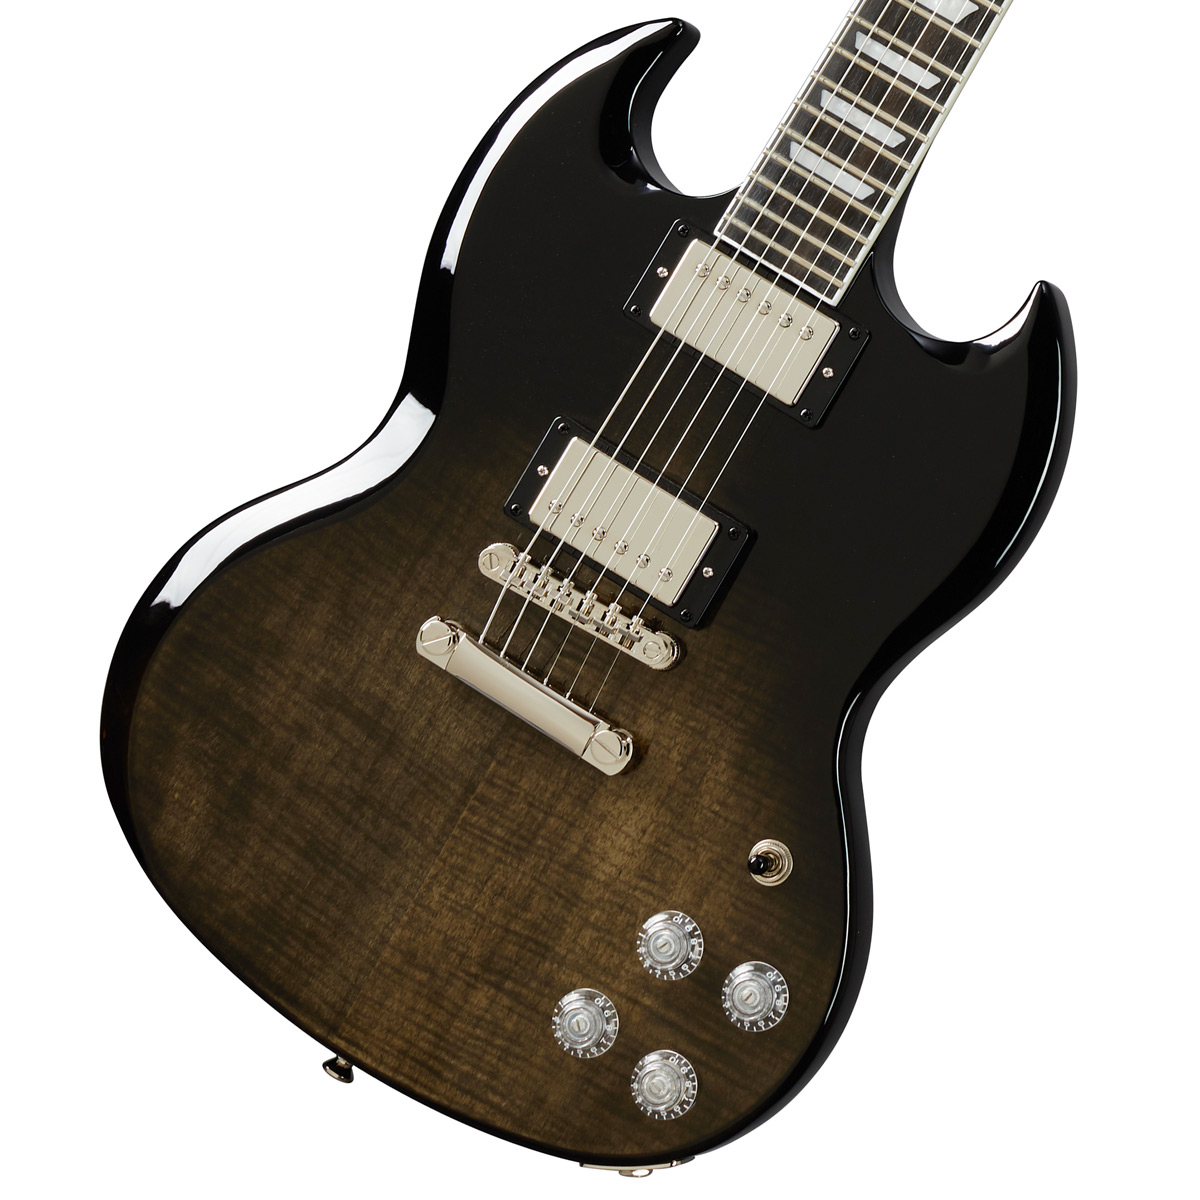 SG　エピフォン　by　Inspired　Trans　イシバシ楽器　Black　Modern　Epiphone　Figured　Gibson　Faded